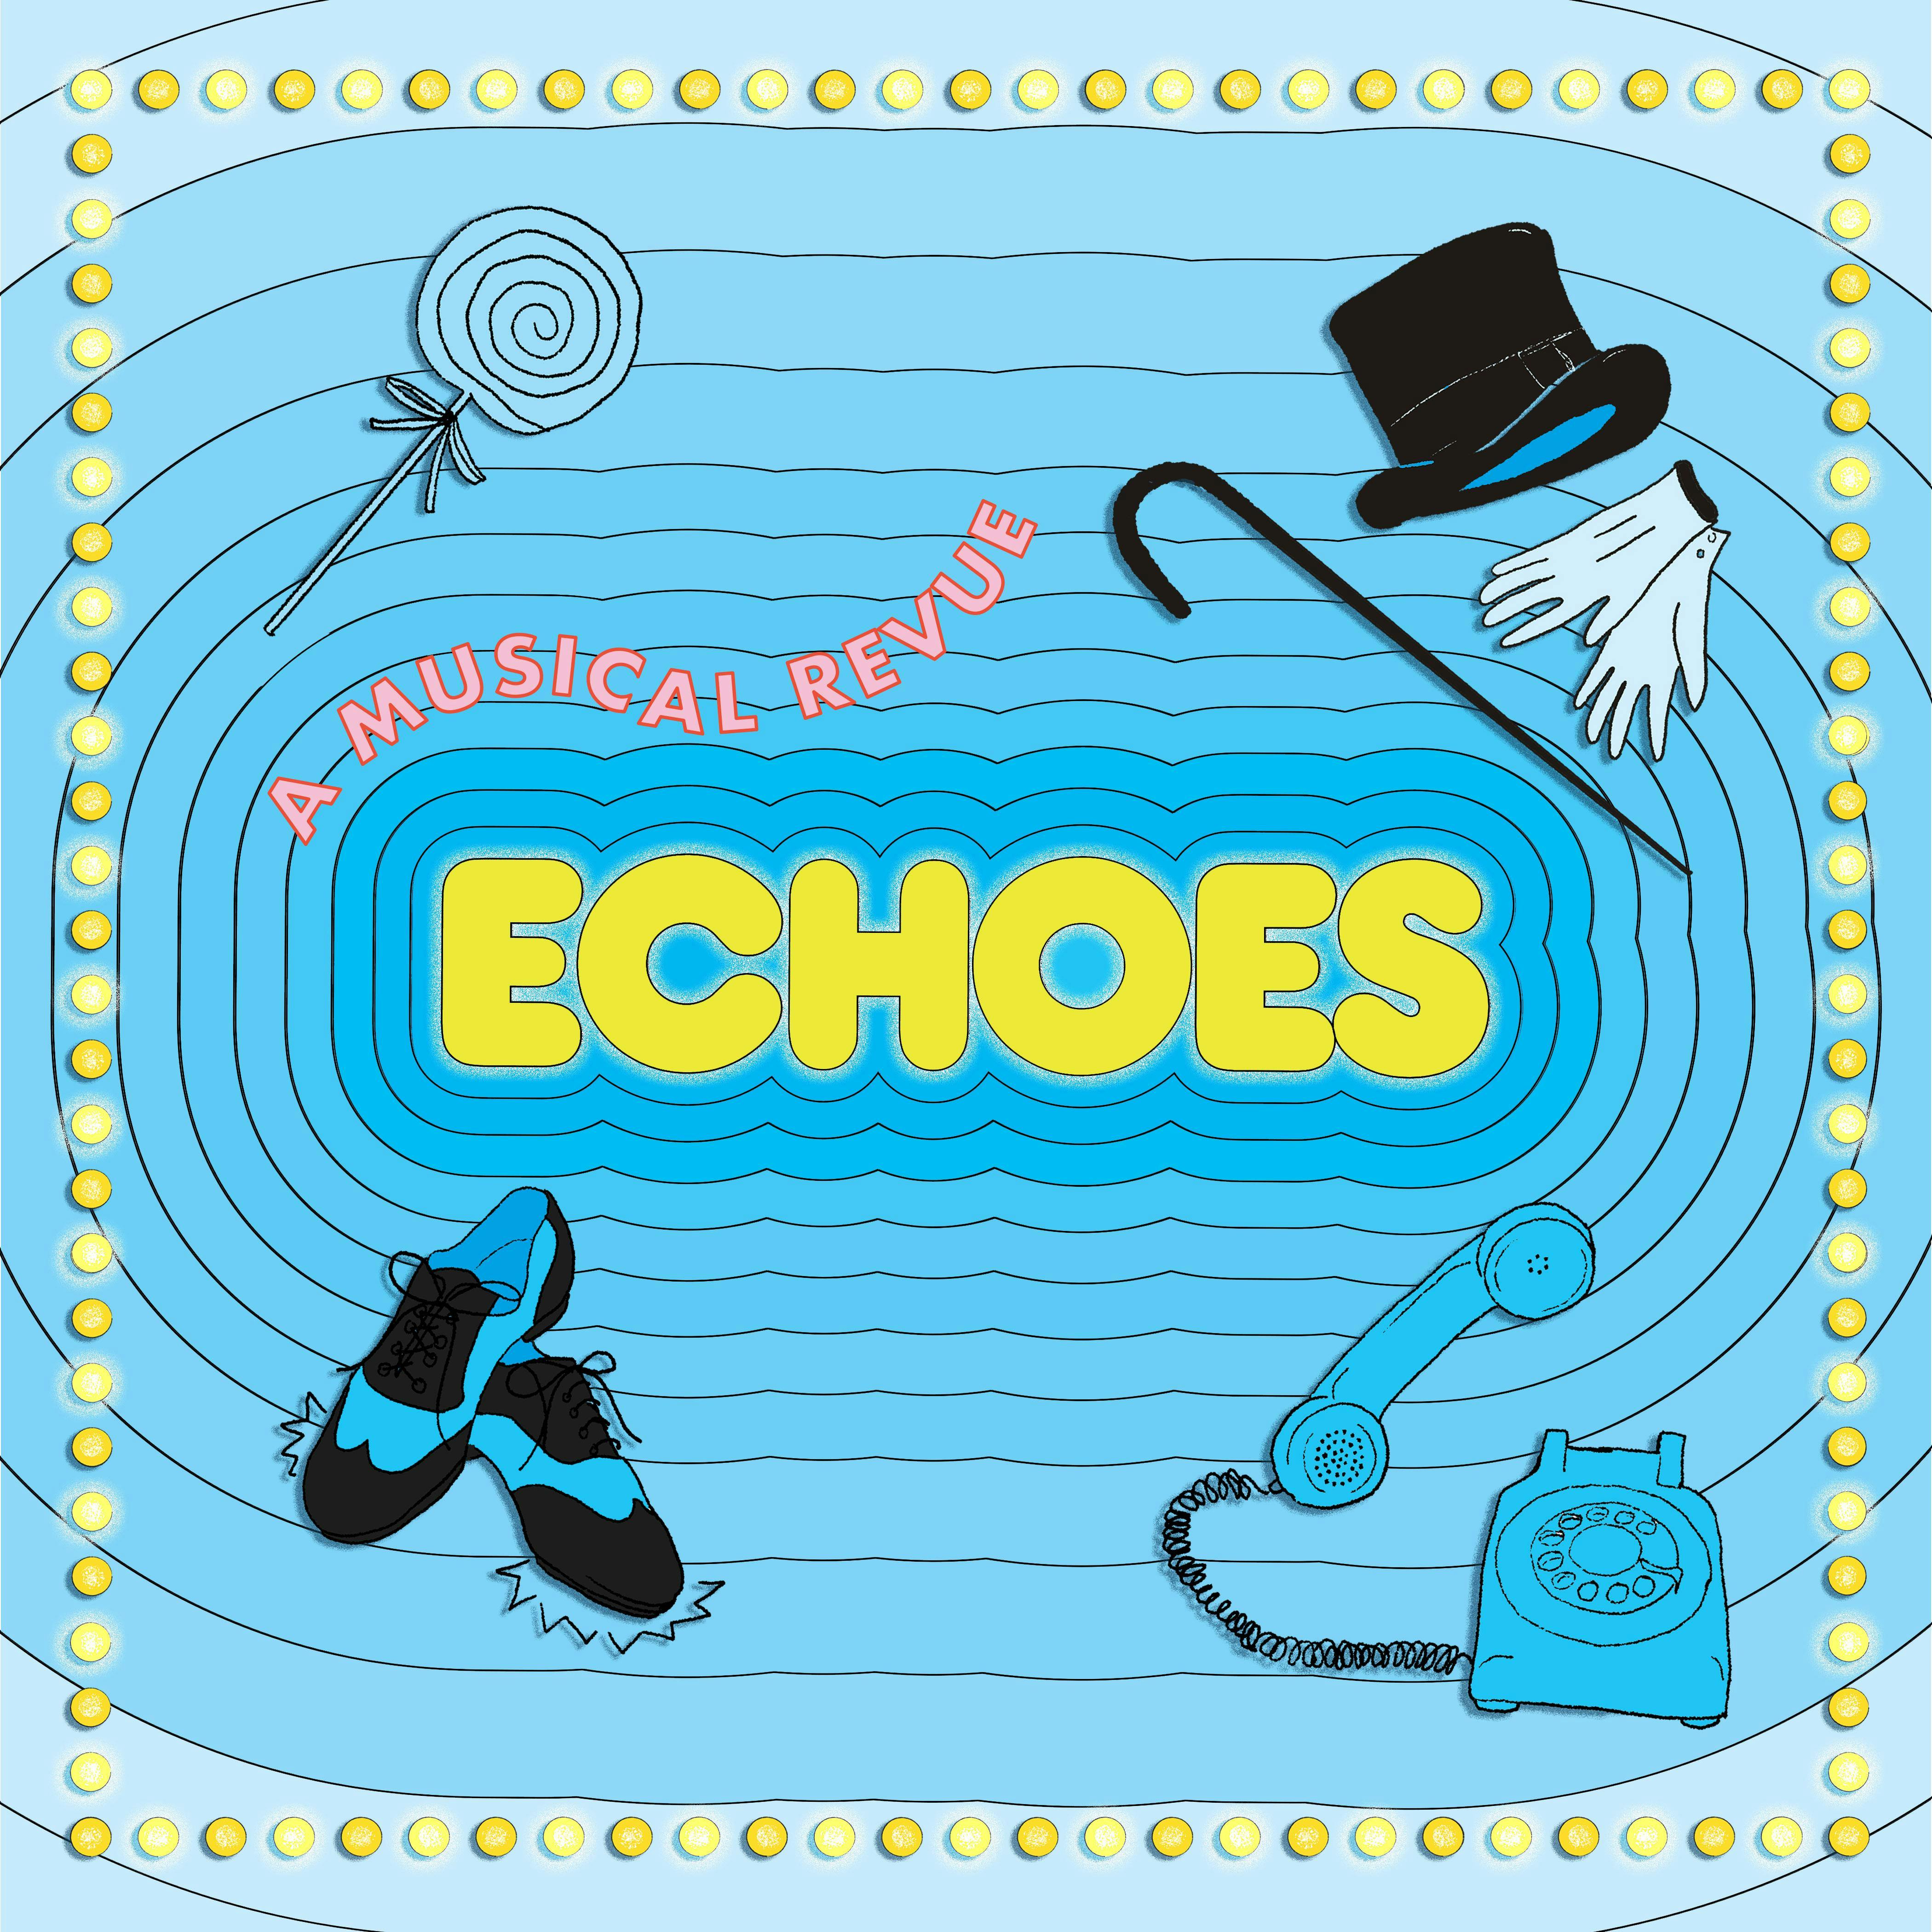 Music House Presents: Echoes, a Musical Review (Sunday, 6/16/19)